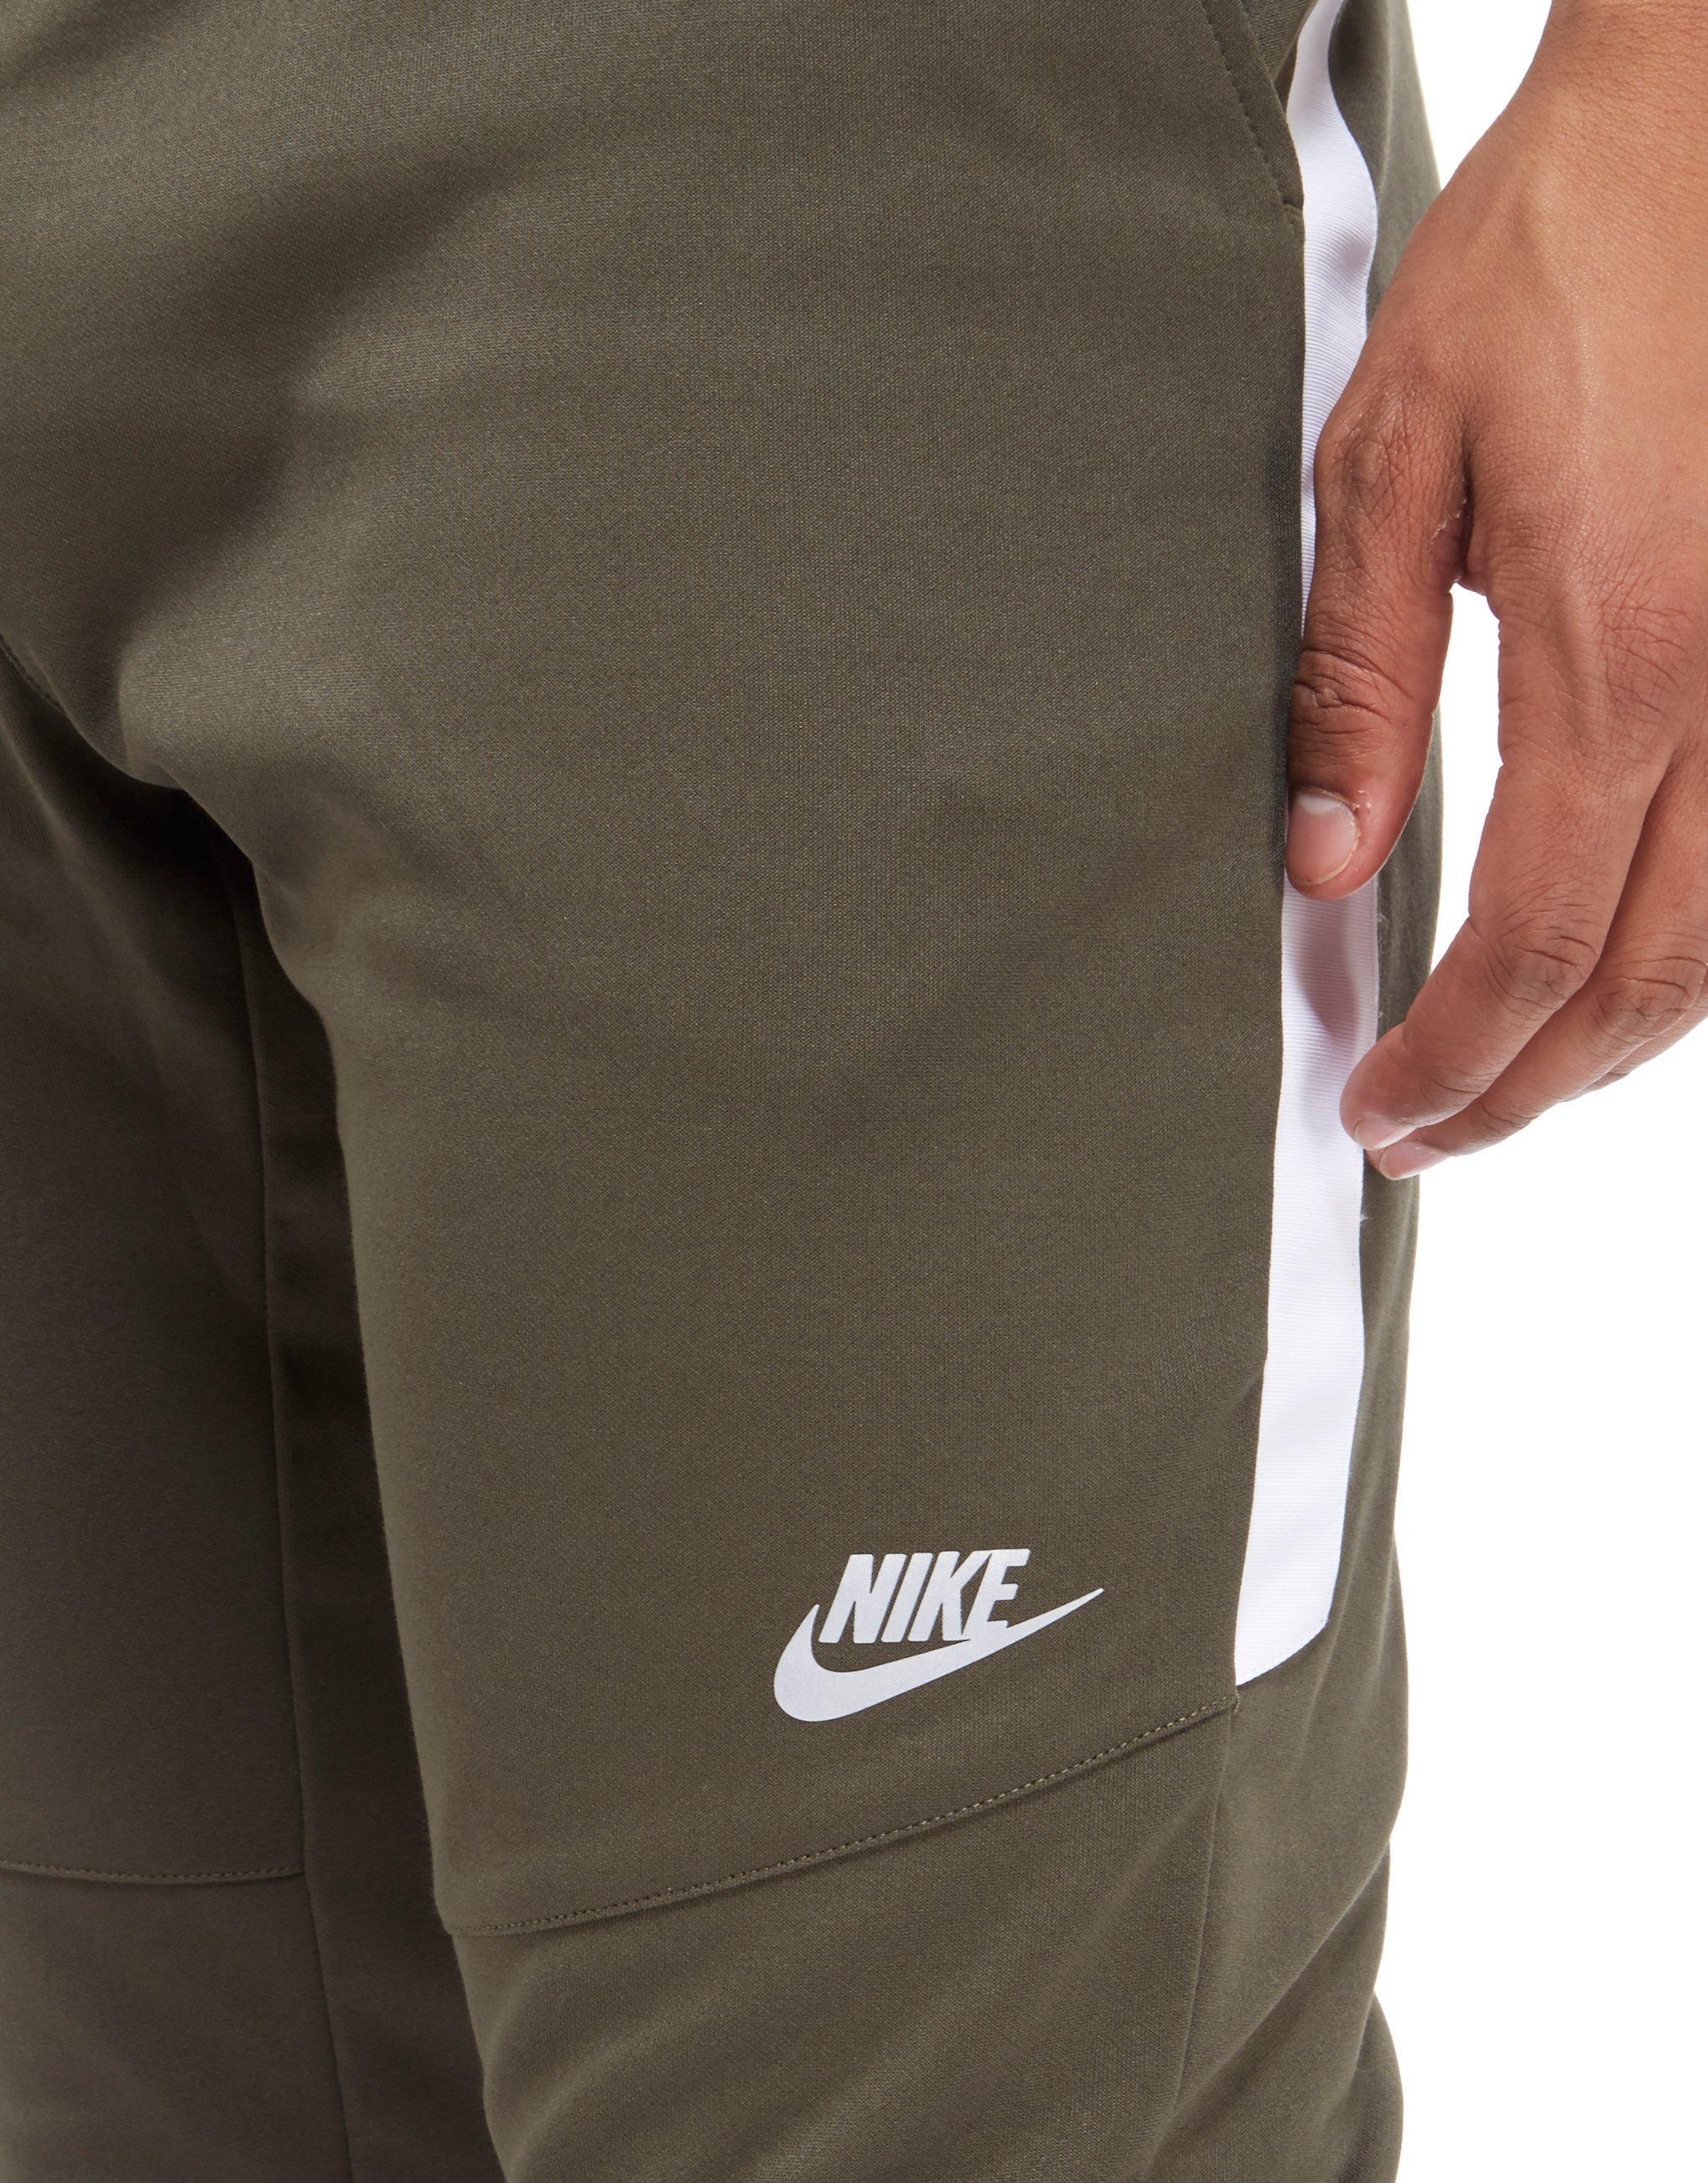 Lyst - Nike Tribute Tracksuit Bottoms in Green for Men